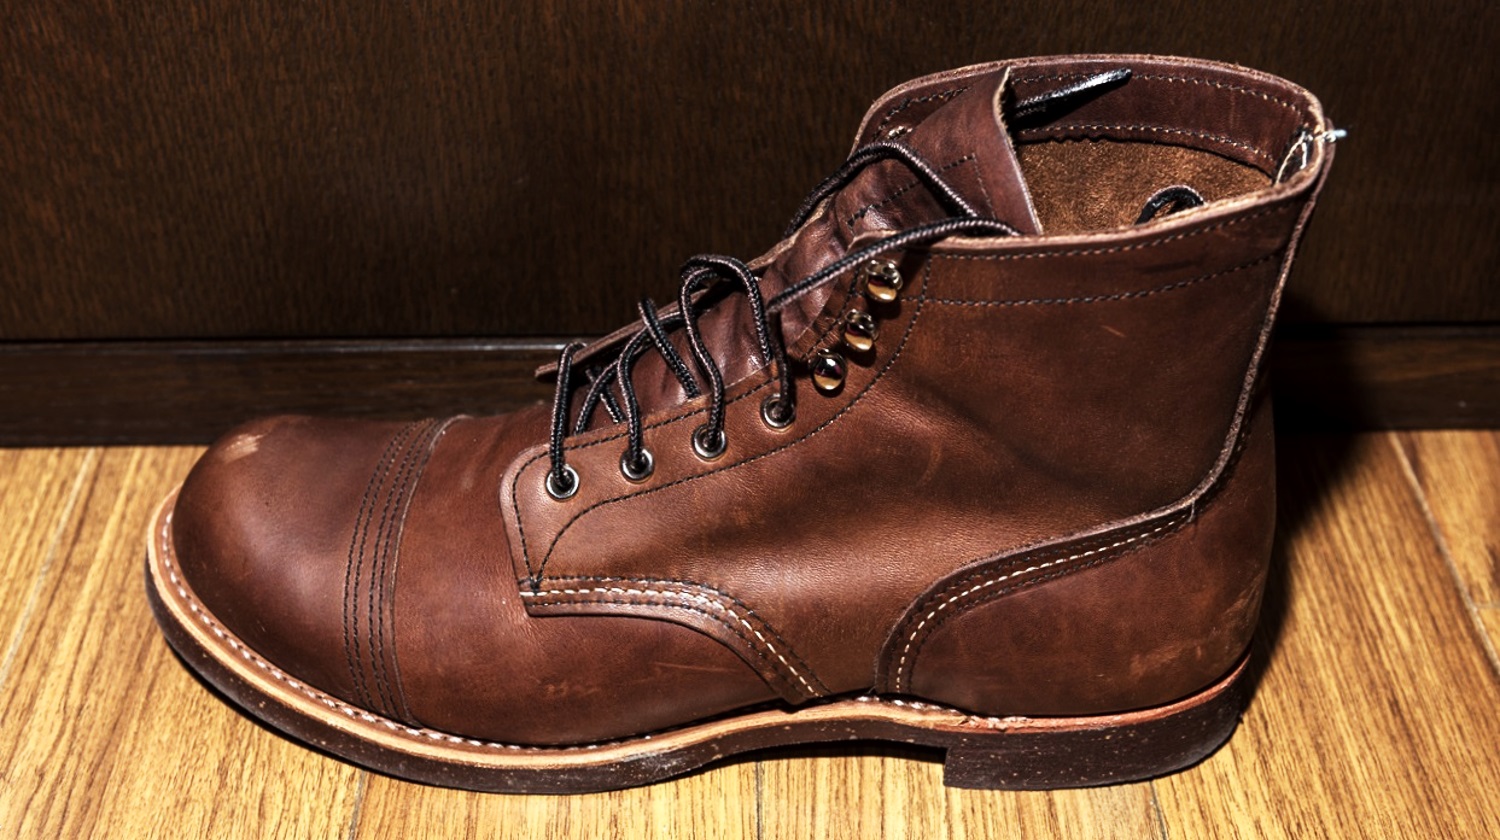 In Review: The Red Wing 8111 Iron Ranger Boots